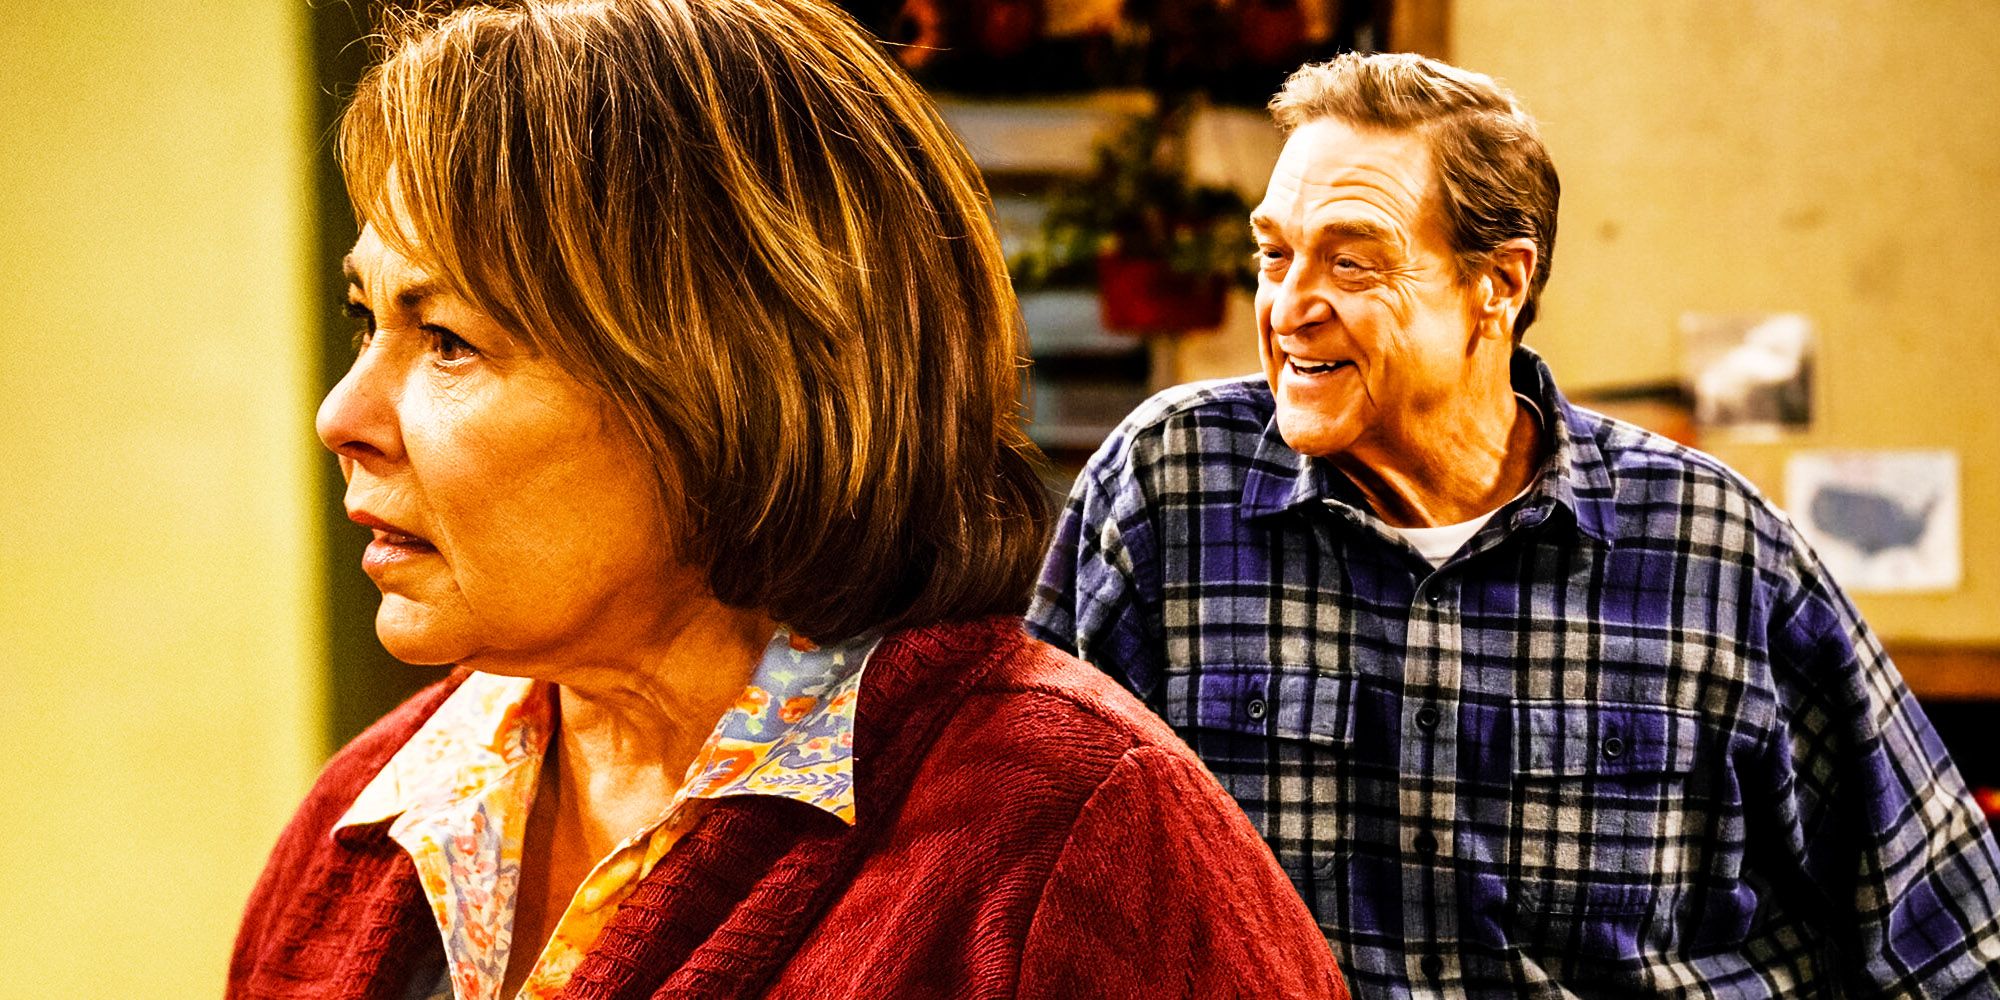 The conners dan and roseanne